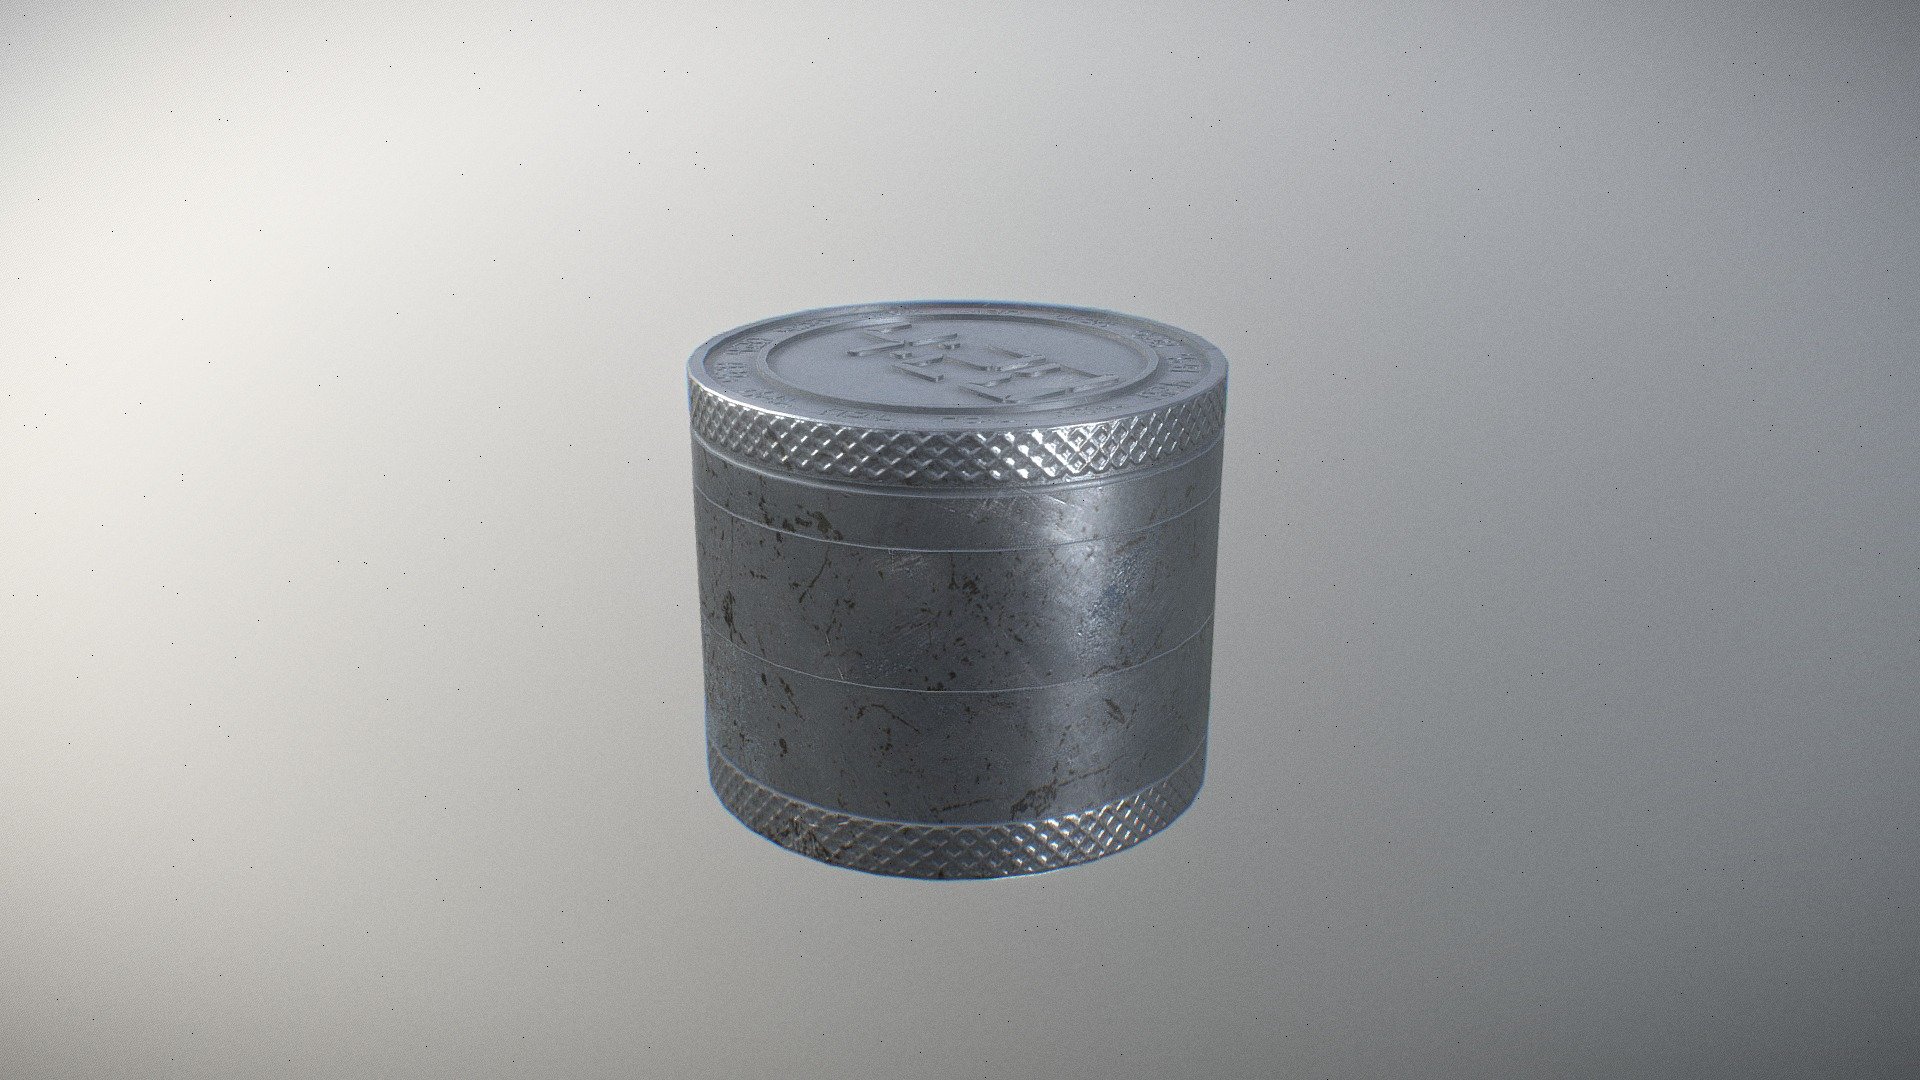 4:20 Weed Grinder, inspiration from my personal grinder.

Fully modeled and animated 3d model